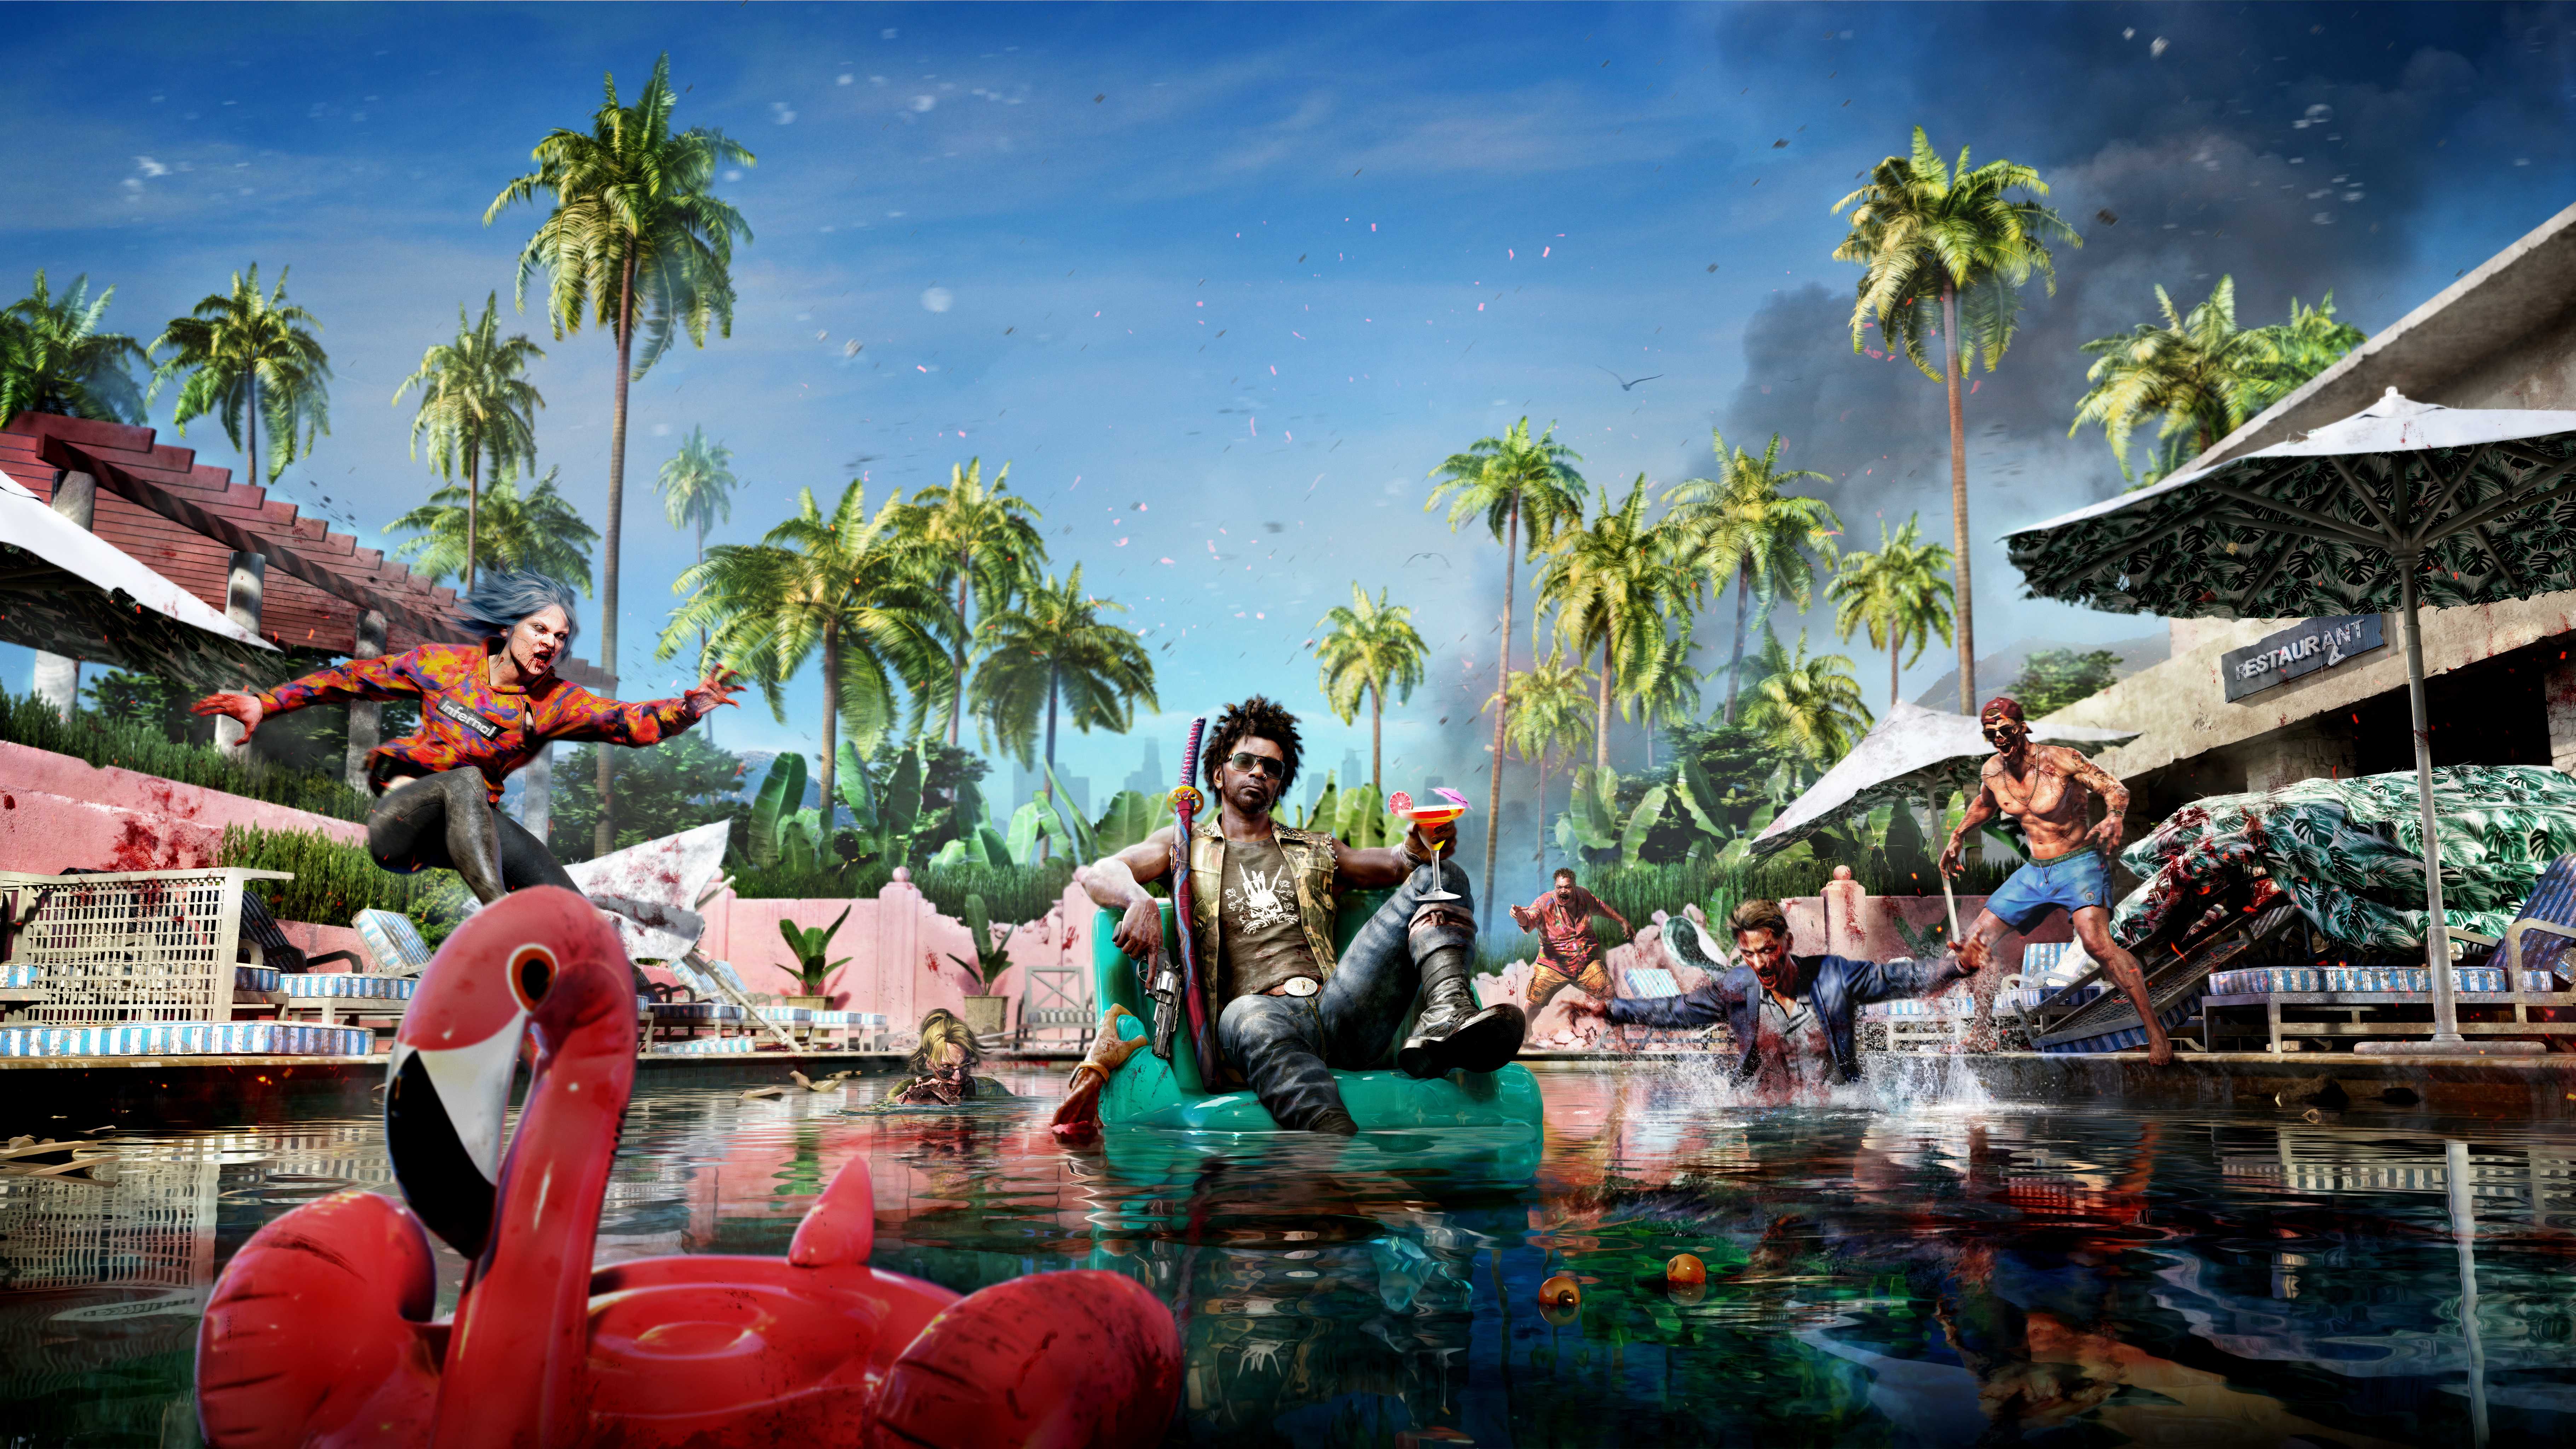 HHW Gaming: Over A Million Slayers Sliced Up Zombies In ‘Dead Island 2’ In Just Three Days